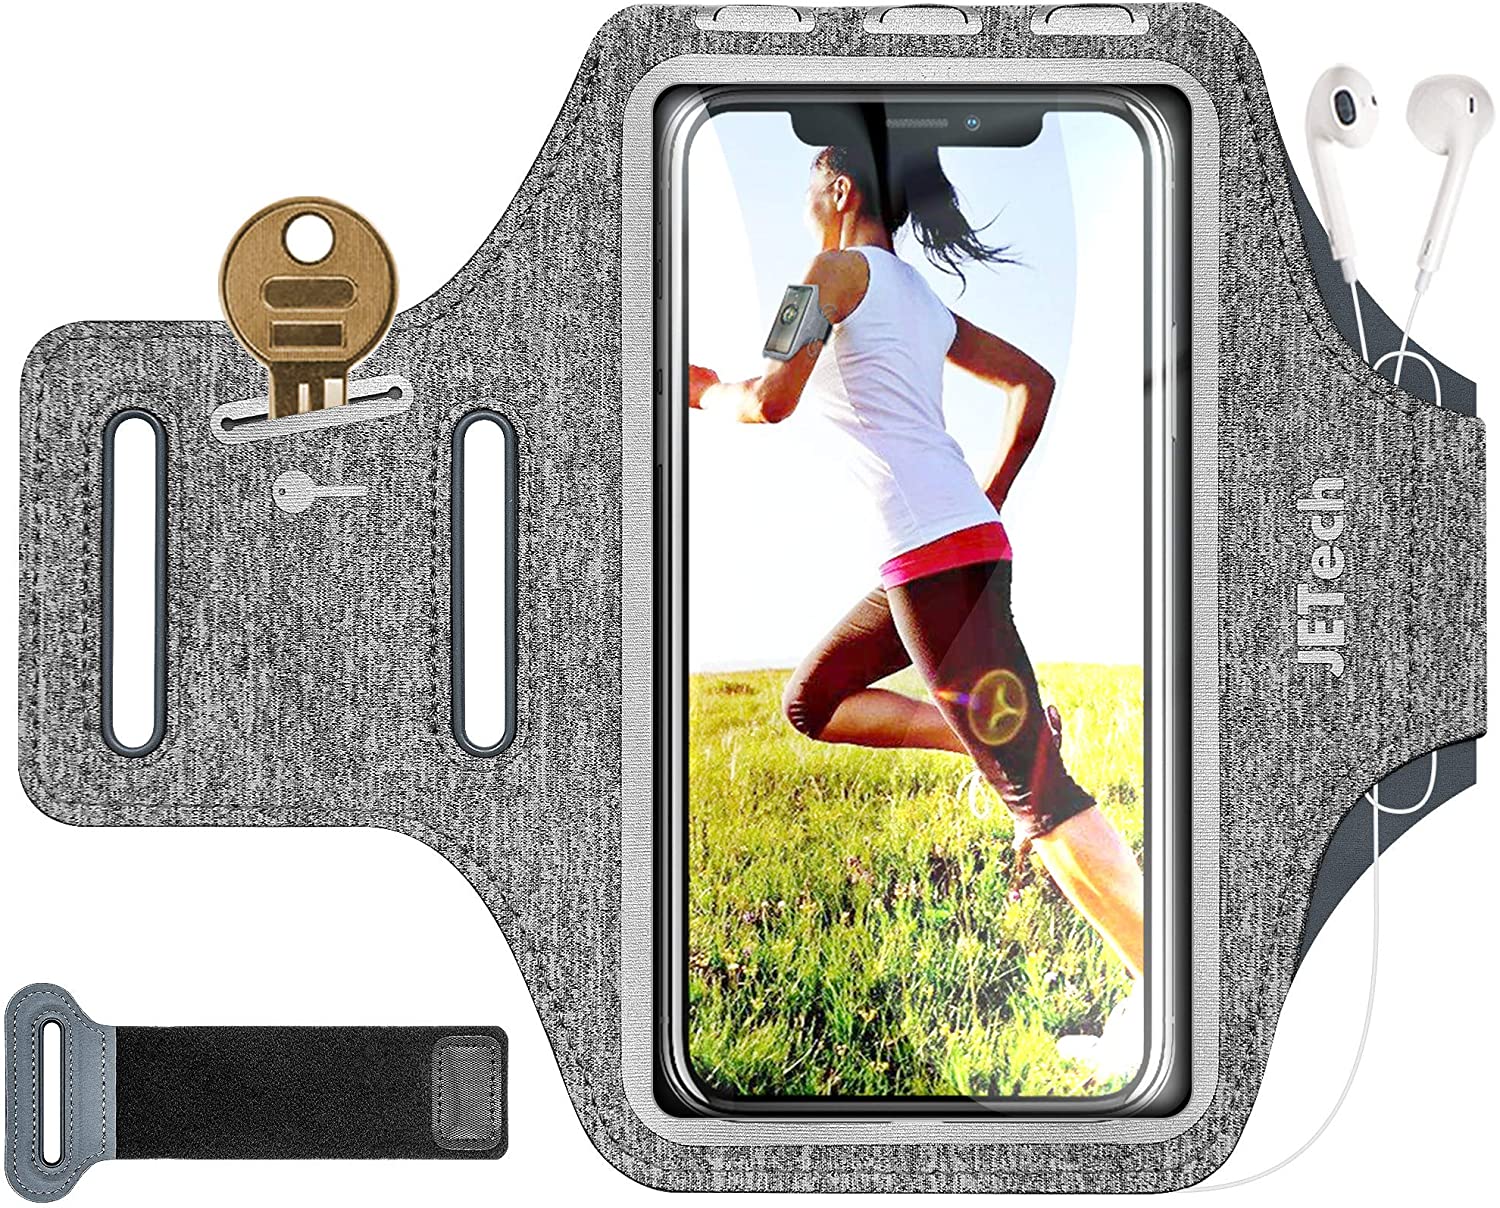 JETech Cell Phone Armband Case for iPhone SE(2020)/11/11 Pro/XR/XS/X/8 Plus/7 Plus/8/7/6s/6, Galaxy S10/S9/S9+, Adjustable Band, Equipped with Key Holder and Card Slot, for Running, Walking, 